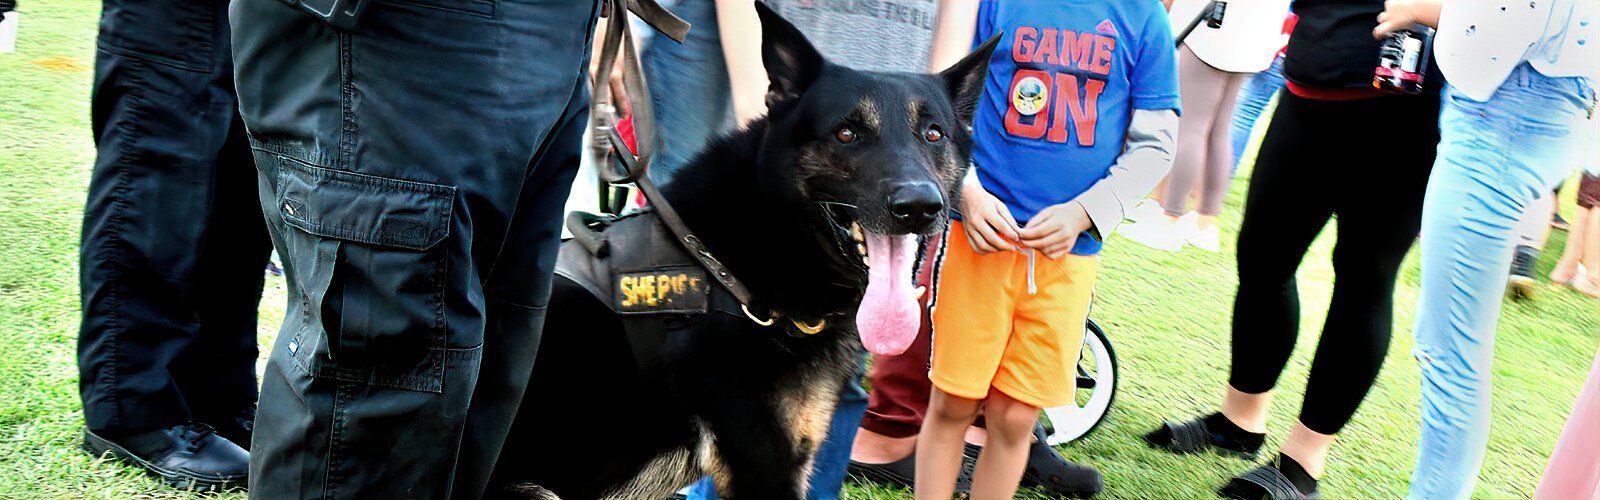 On the field after the graduation ceremony, attendees meet K-9 Logan, a German shepherd and member of the K-9 squad.